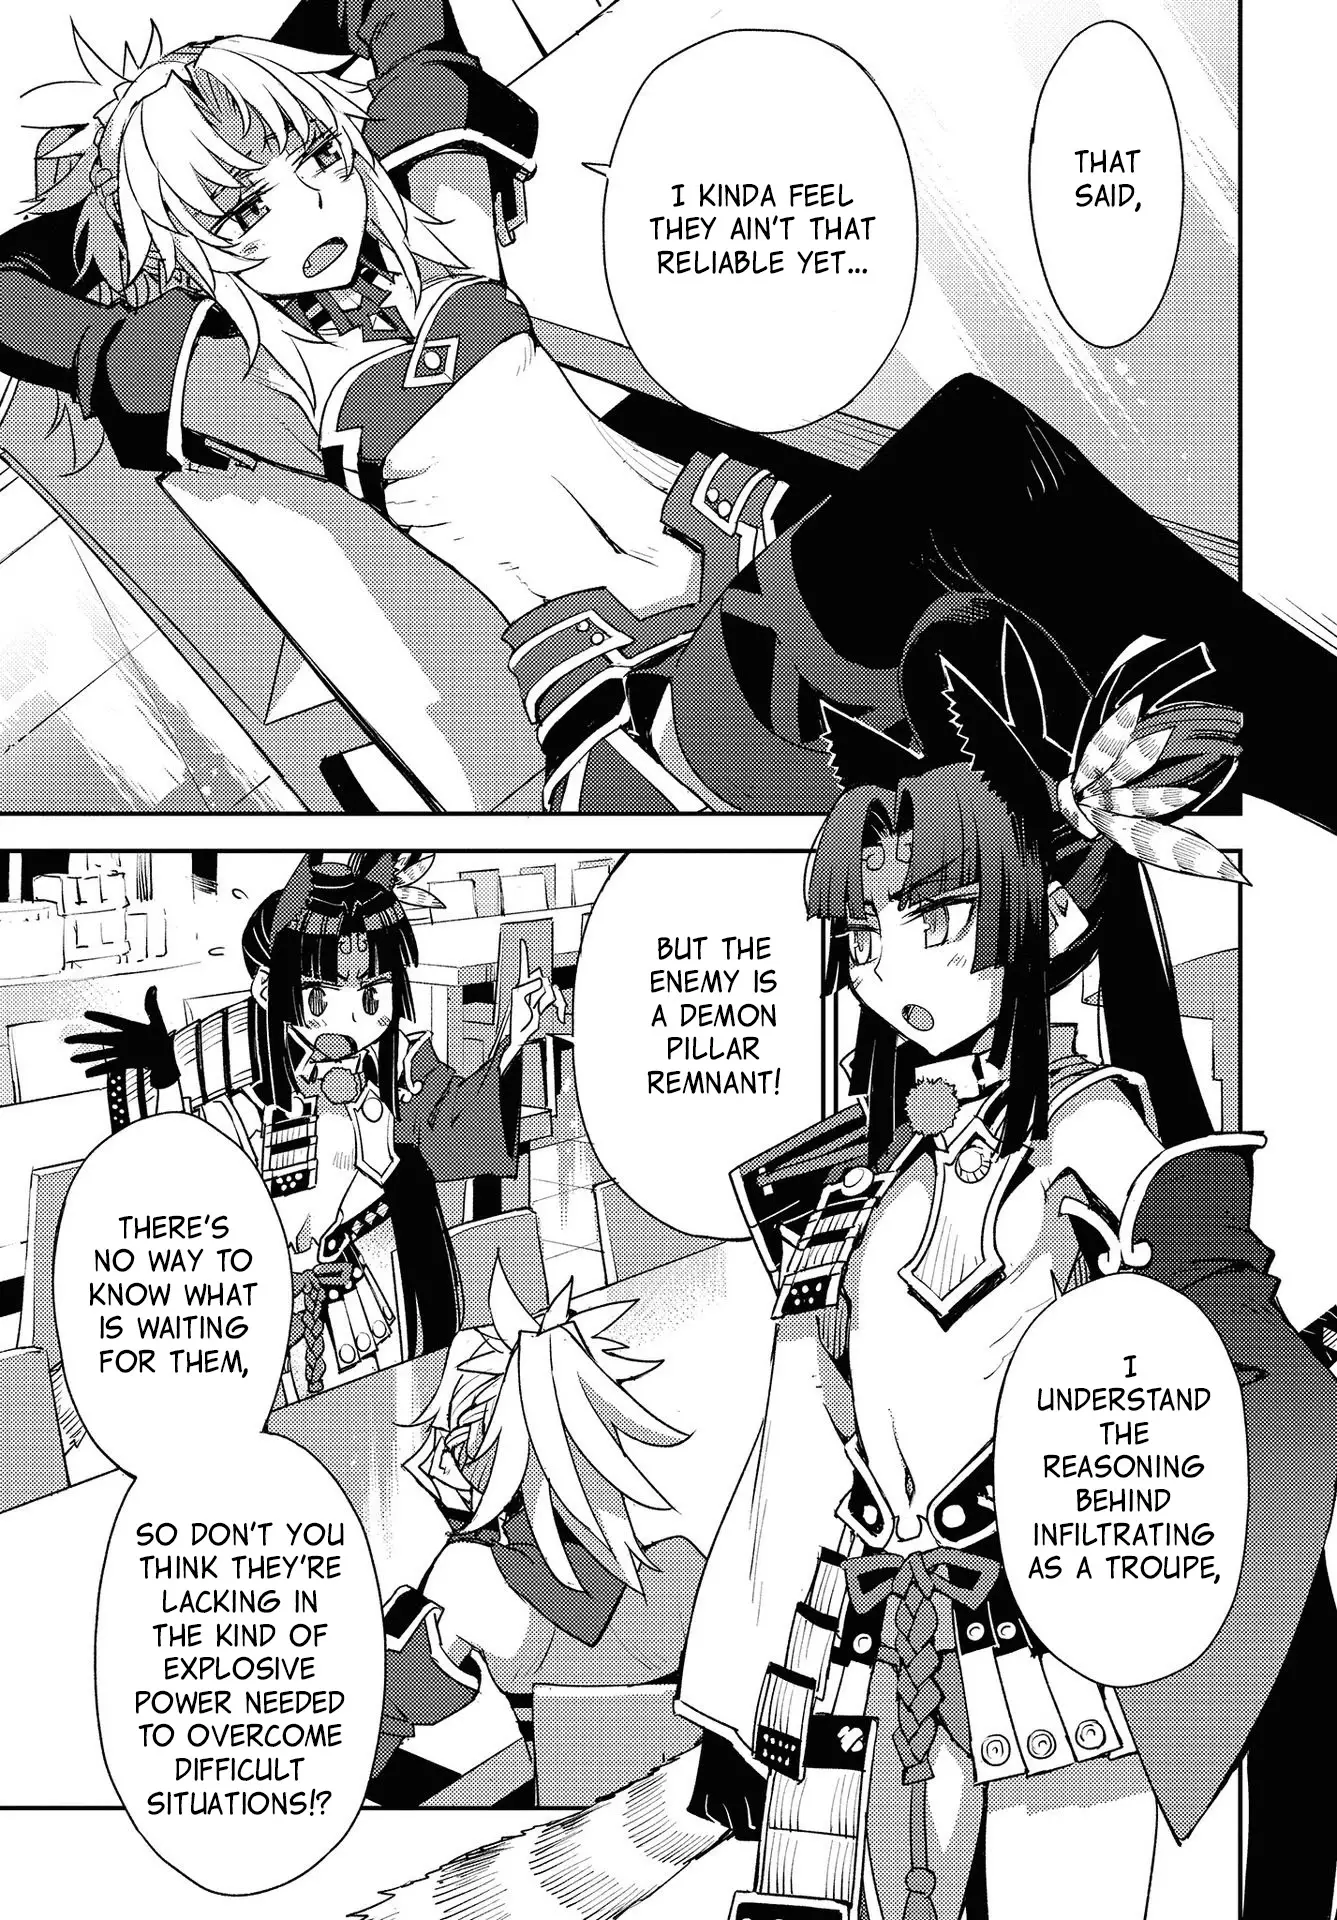 Fate/grand Order: Epic Of Remnant - Subspecies Singularity Iv: Taboo Advent Salem: Salem Of Heresy - 17 page 3